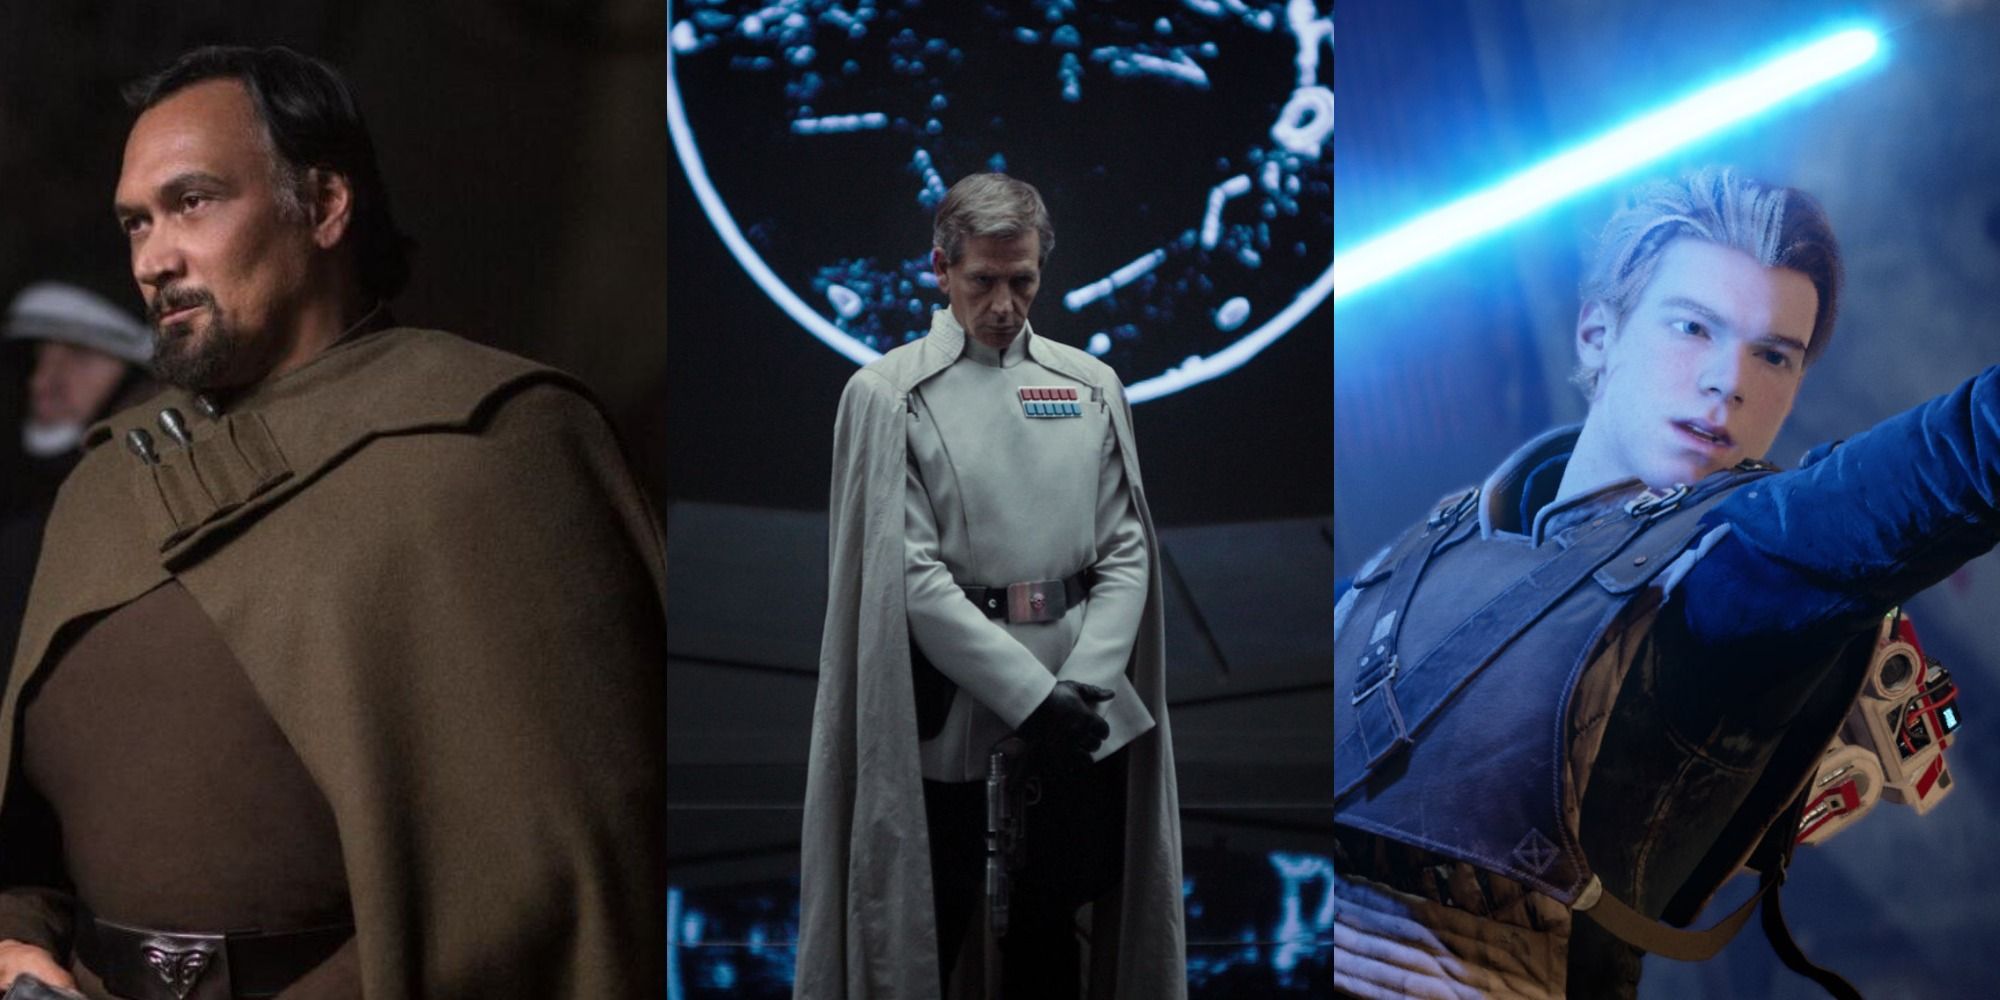 Andor Cast and Character Guide: Who's Who in the Star Wars Series?